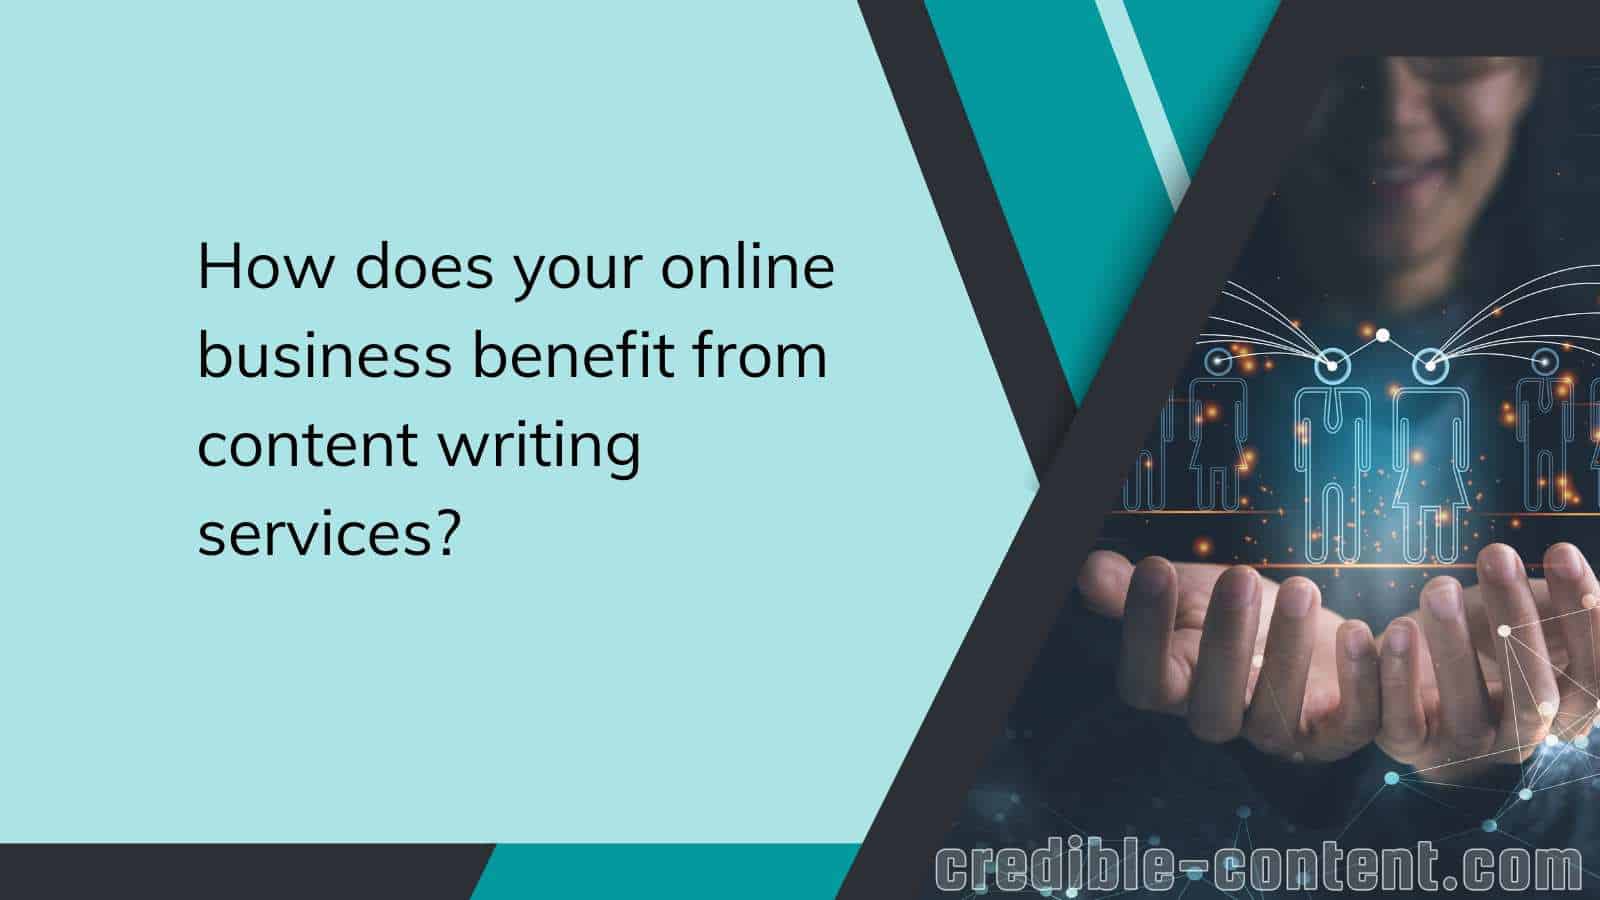 How does your online business benefit from content writing services